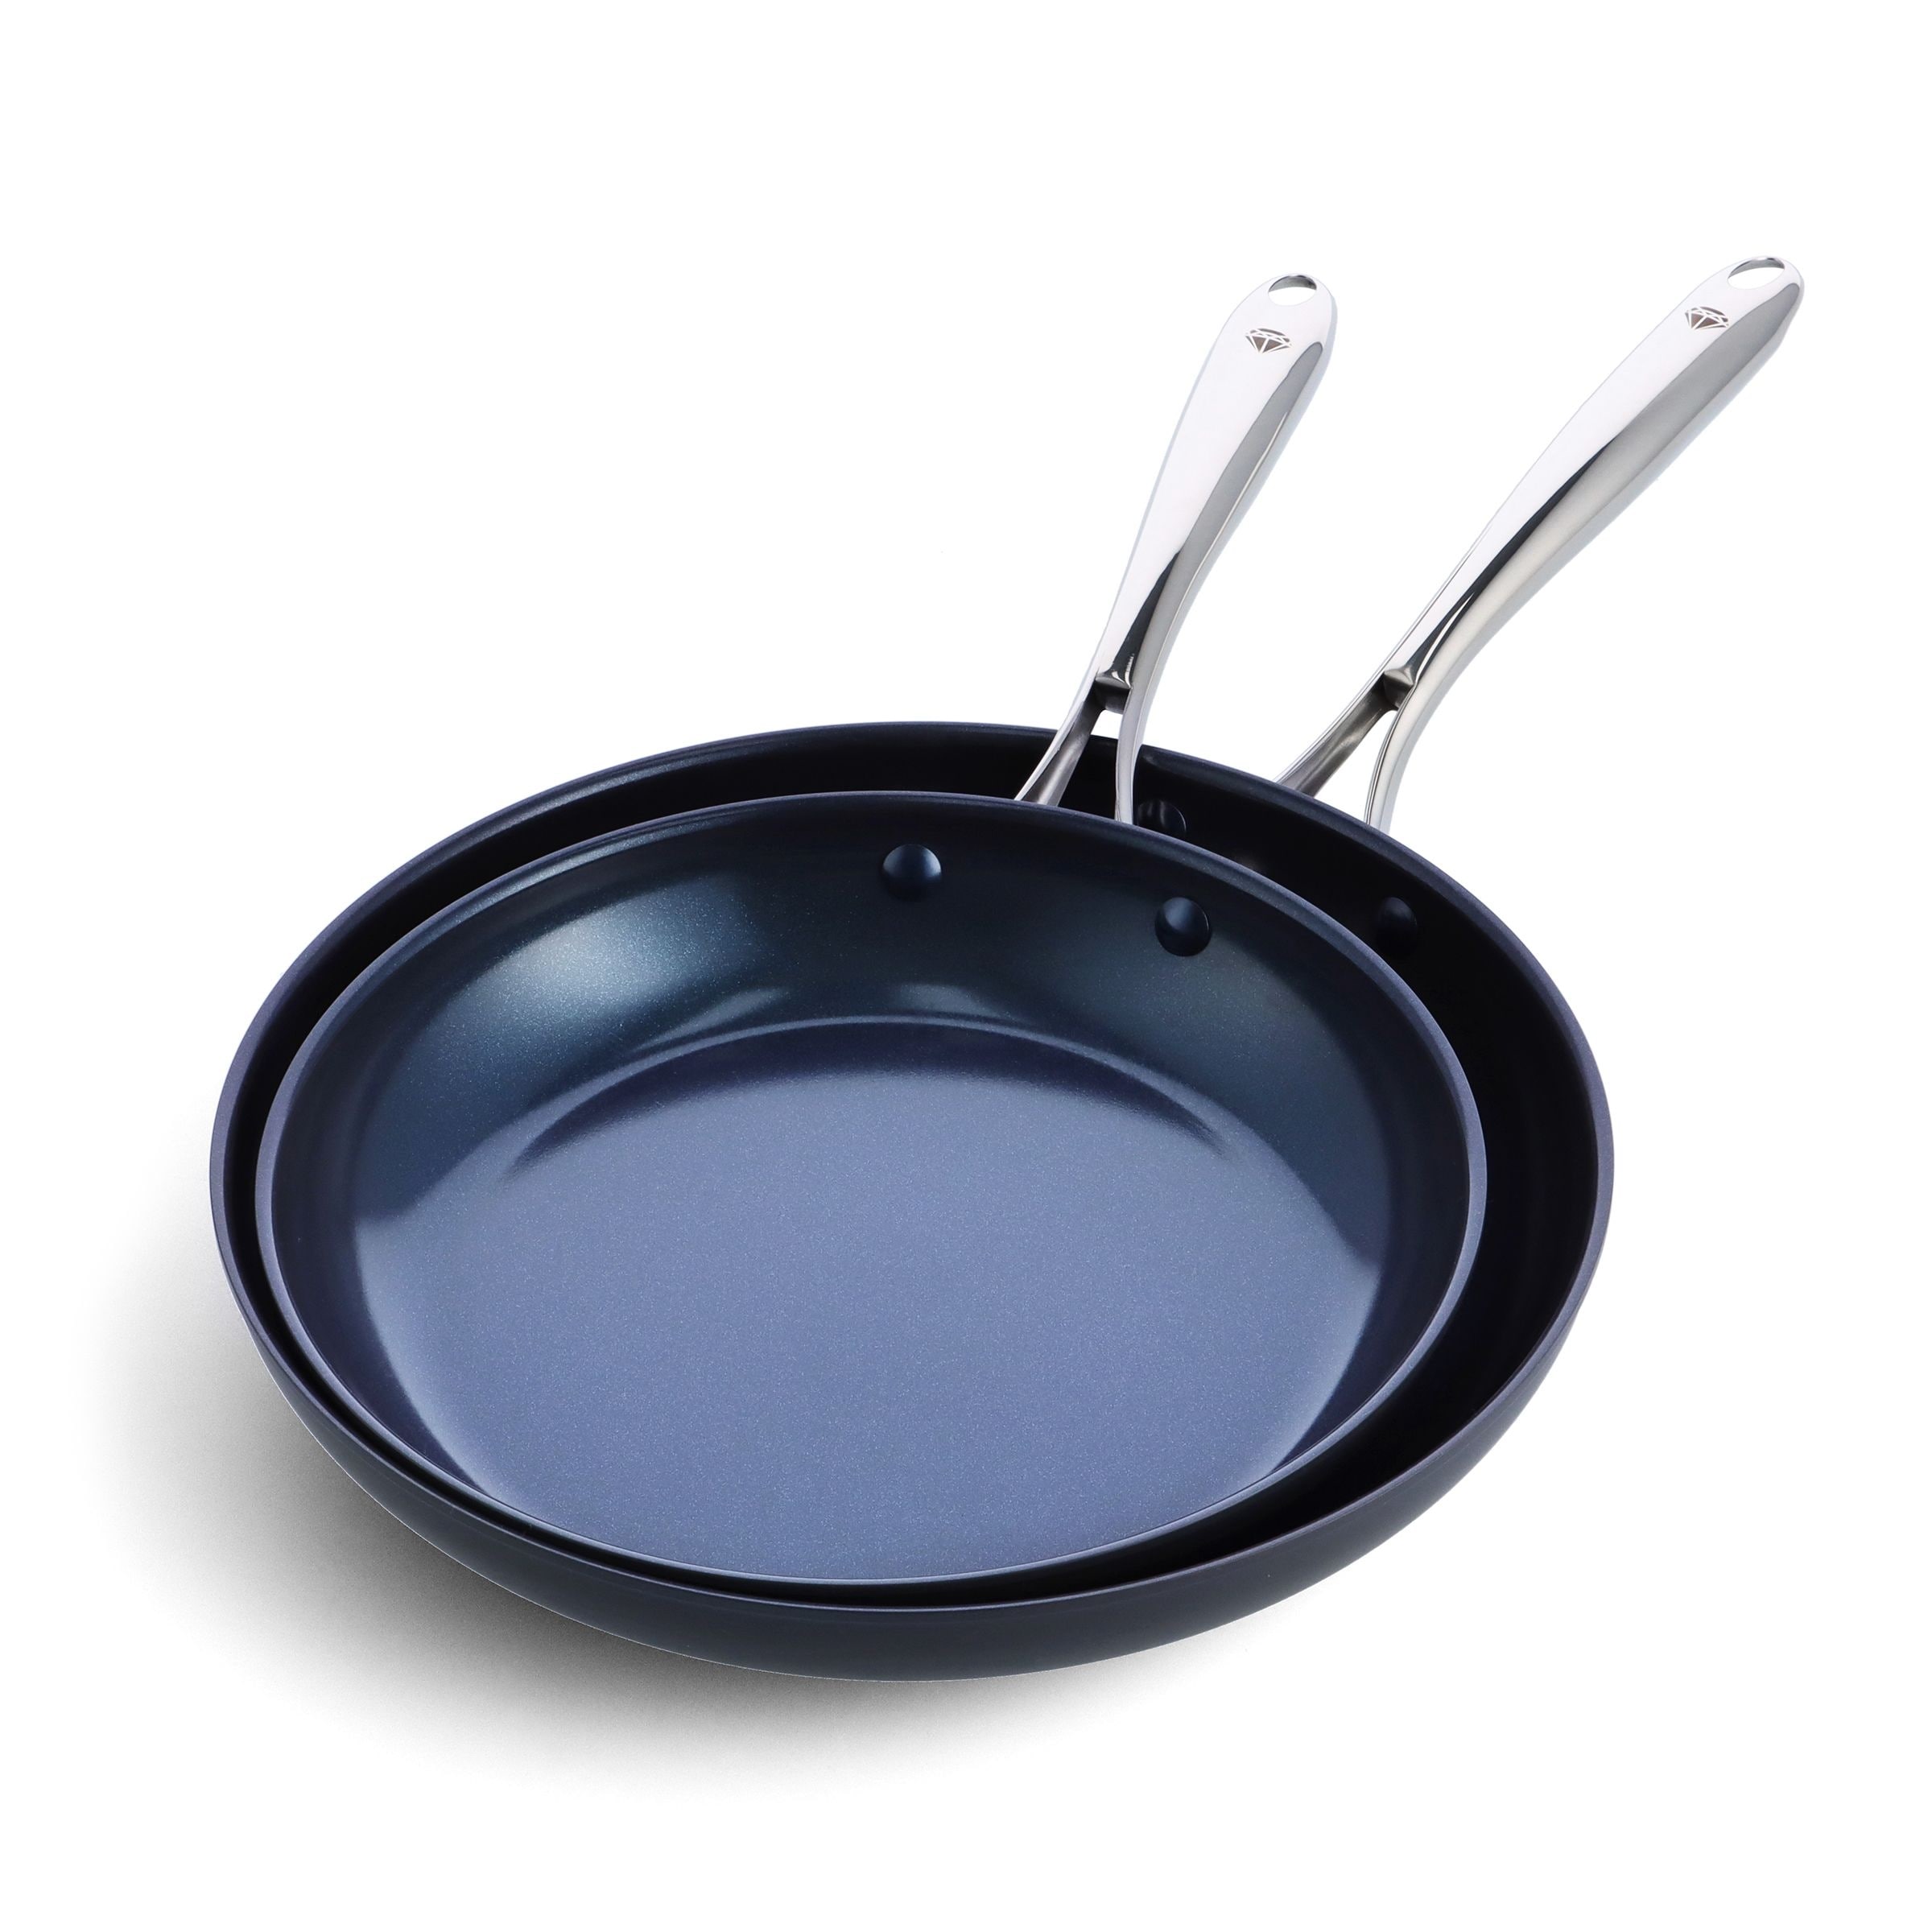 https://ak1.ostkcdn.com/images/products/is/images/direct/9205bc0ad1e6b9bae5fac01a512a0ce3bfbc9d41/Blue-Diamond-Hard-Anodized-Toxin-Free-Ceramic-Nonstick-Dishwasher%2C-Oven%2C-Broiler%2C-Metal-Utensil-Safe-Frying-Pan-Set%2C-10%22-and-12%22.jpg